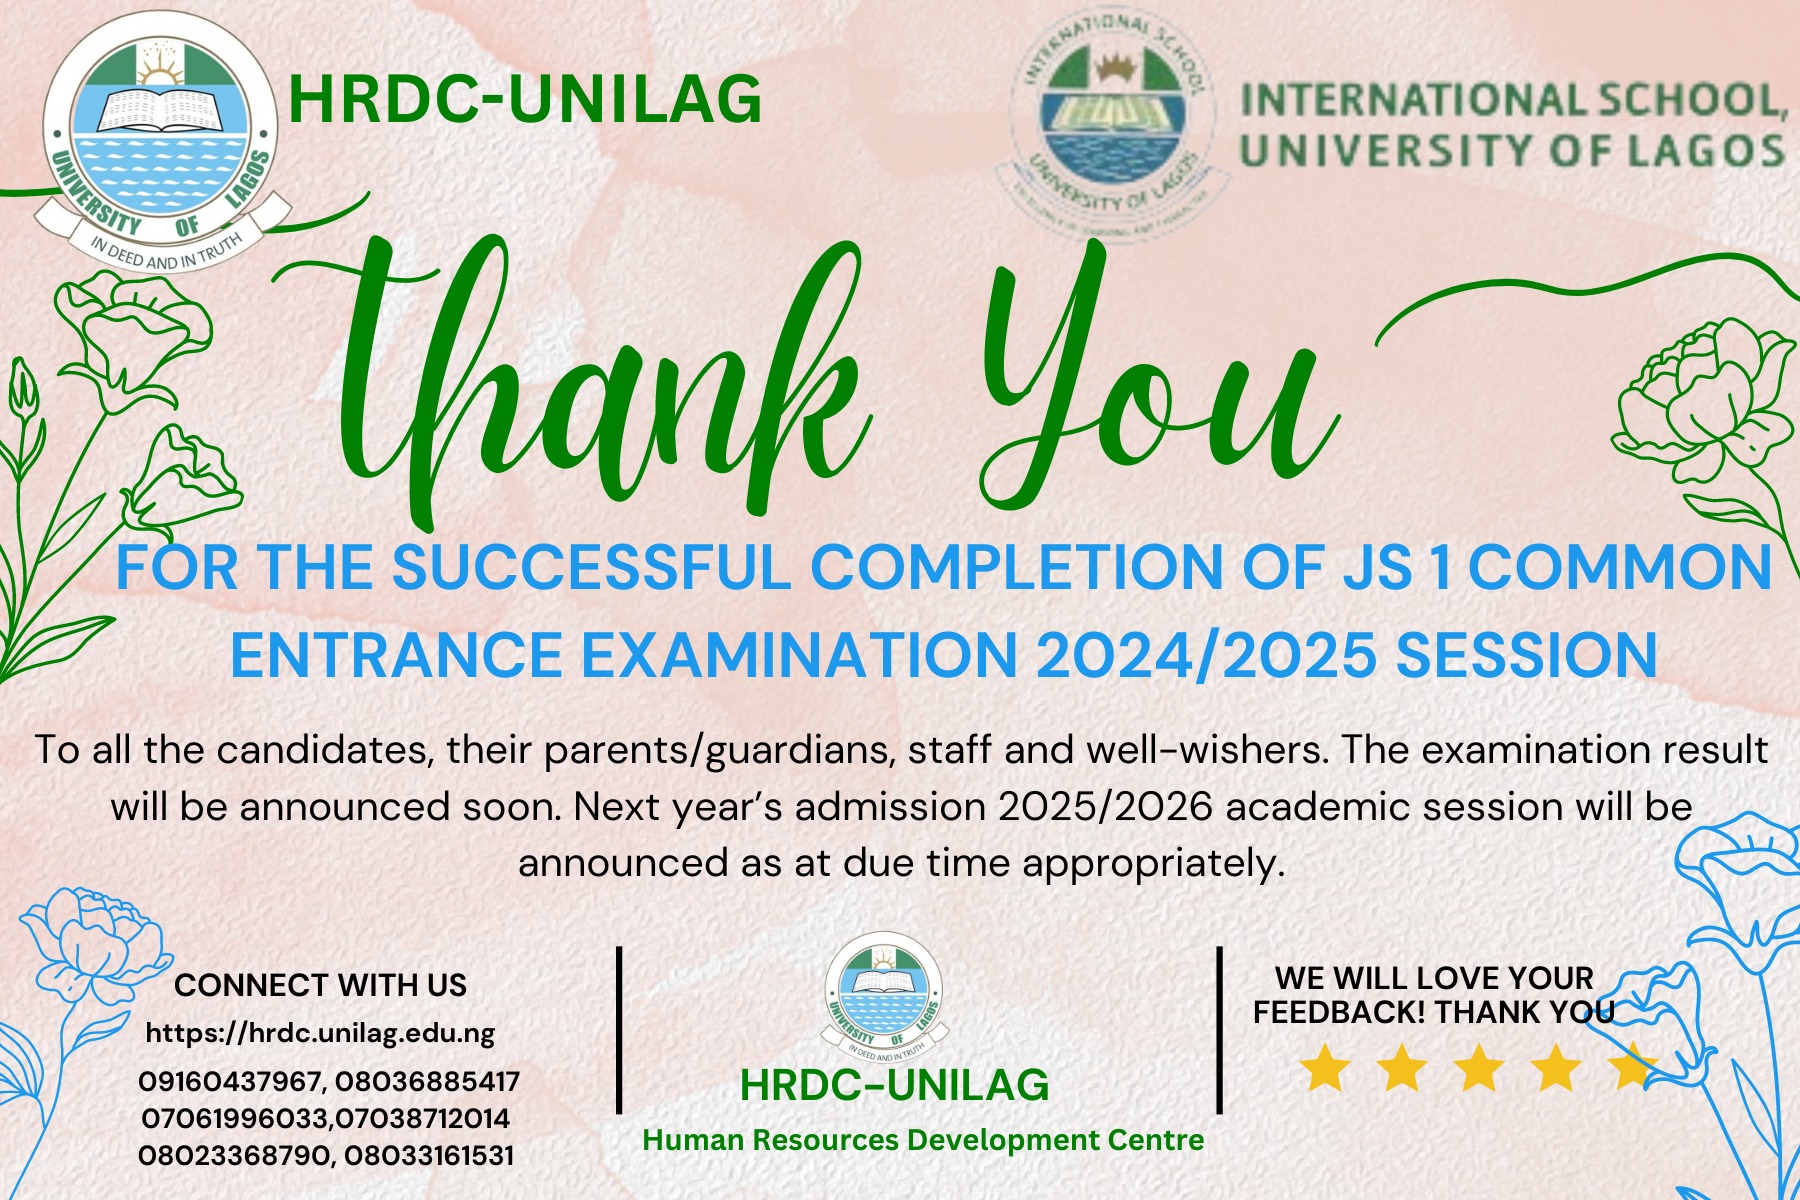 Human Resources Development Centre (HRDC) University of Lagos Announces Sales of 2024/2025 Admission into Basic 7 (JS1) International School University of Lagos. Application has ended for Basic 7, JS 1 common entrance examination into International School, University of Lagos, for the academic session of 2024-2025. The result of the common entrance examination will be announced at the appropriate time. Thank you all.